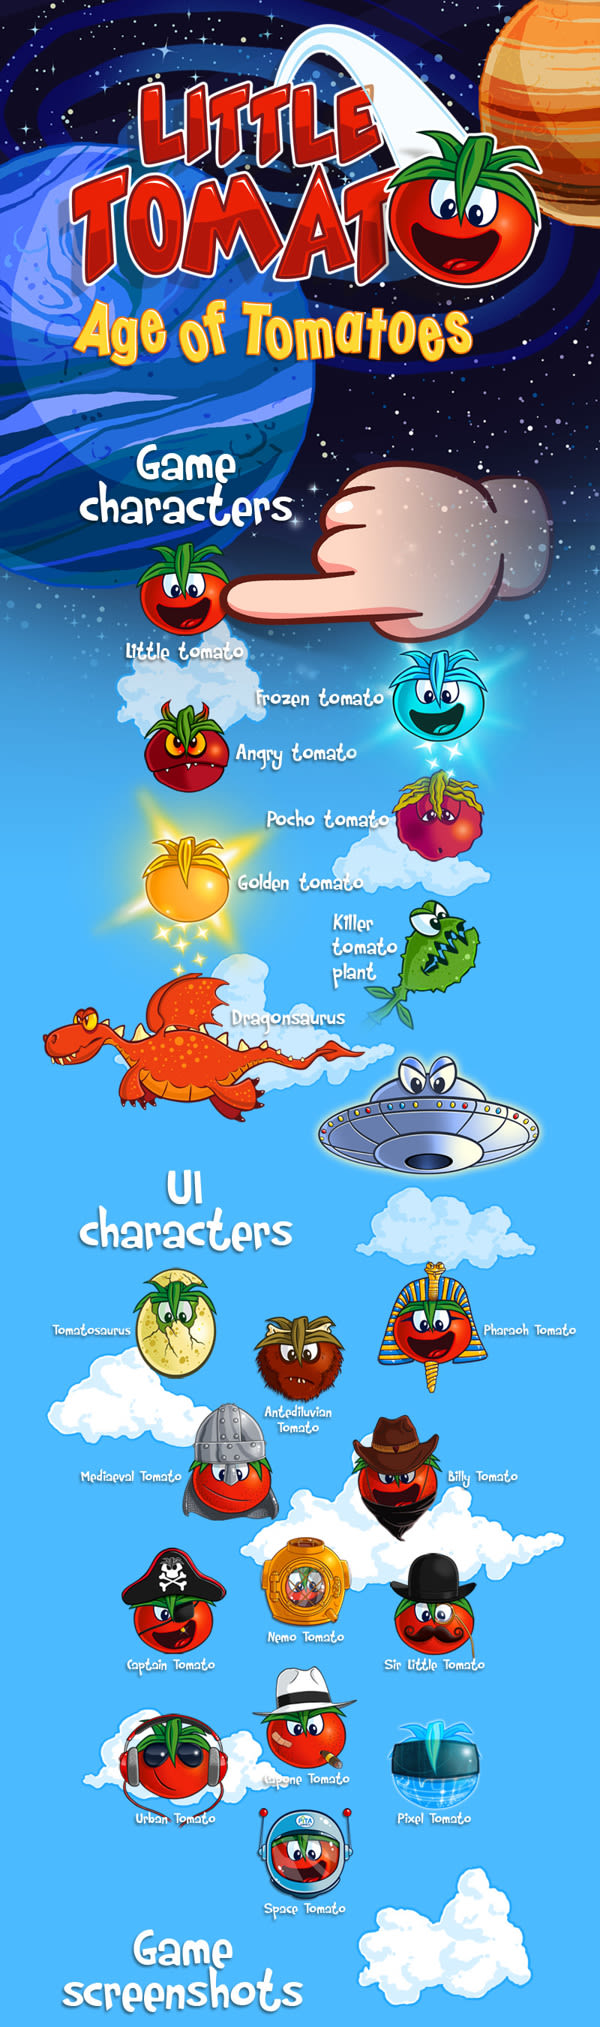 Little Tomato, Age of Tomatoes, Android and iOS game 0